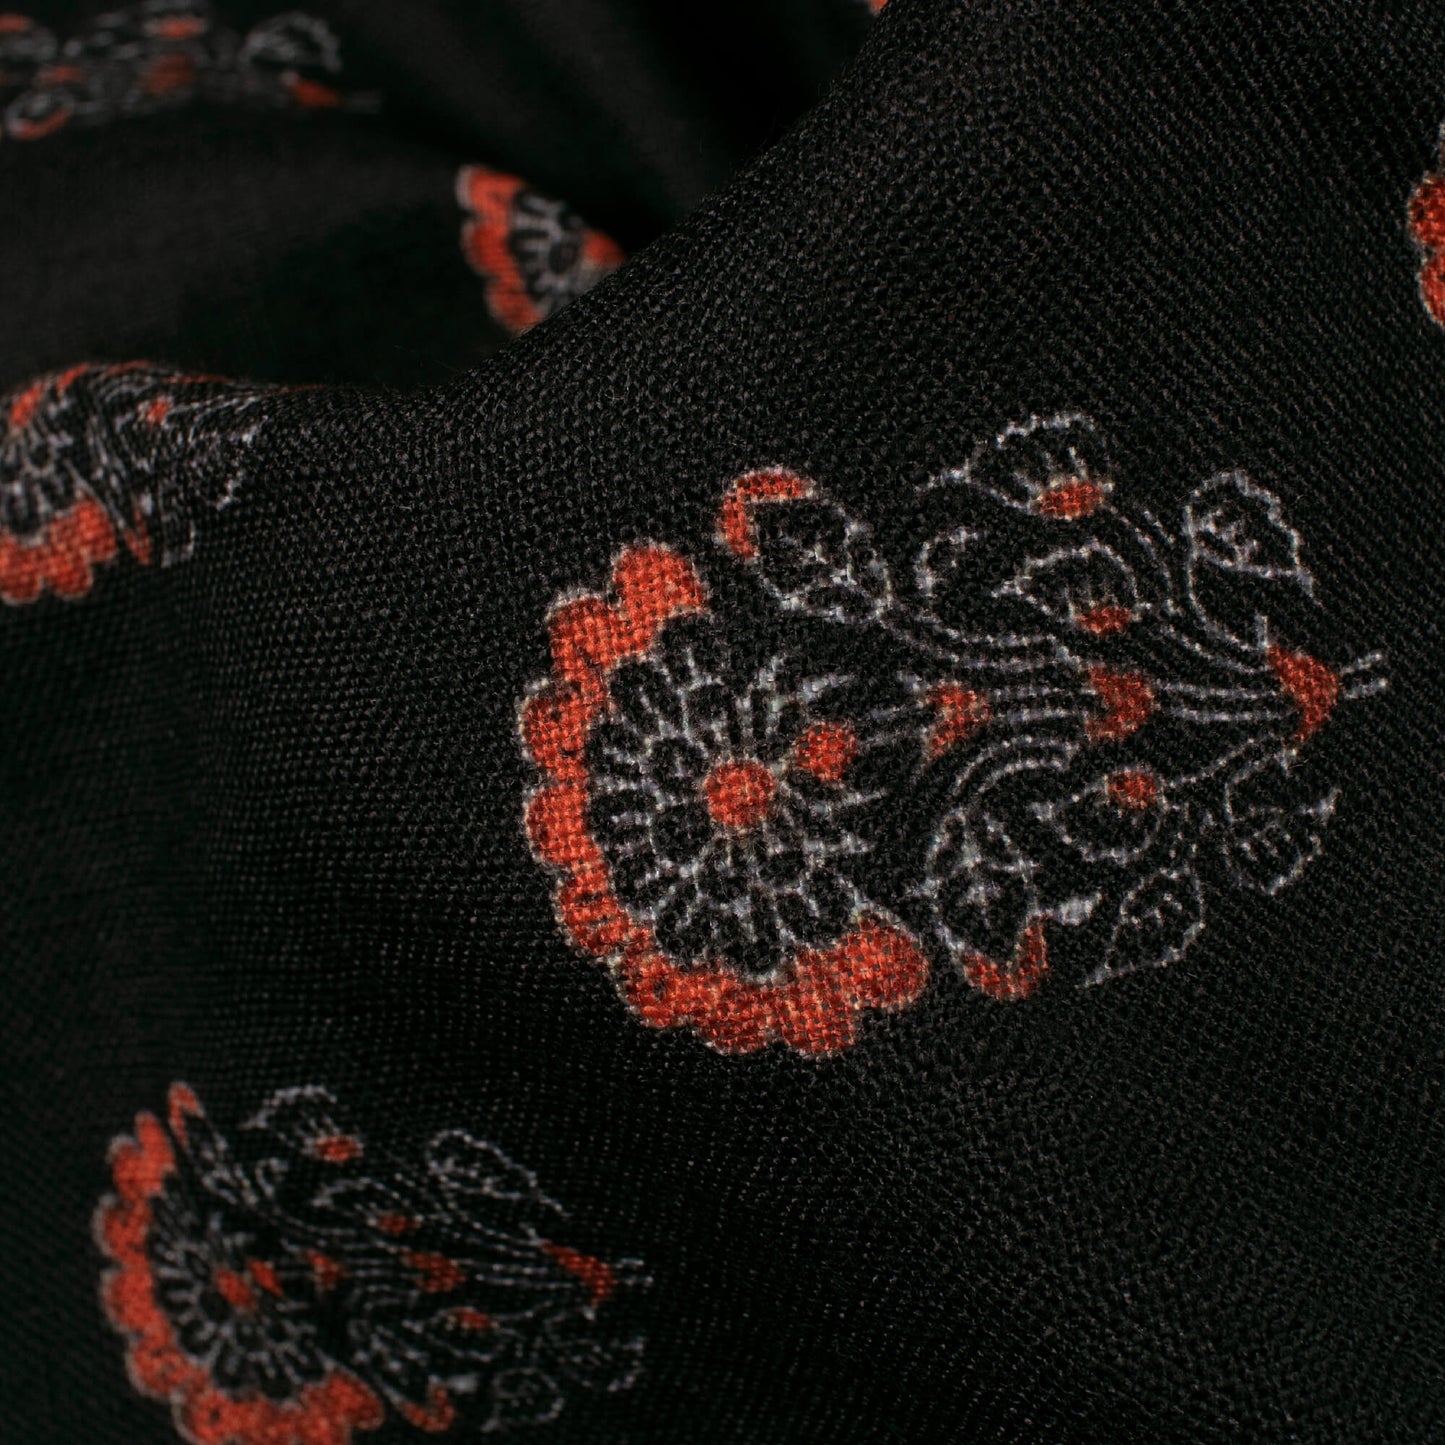 Black And Orange Floral Pattern Digital Print Linen Textured Fabric (Width 56 Inches)